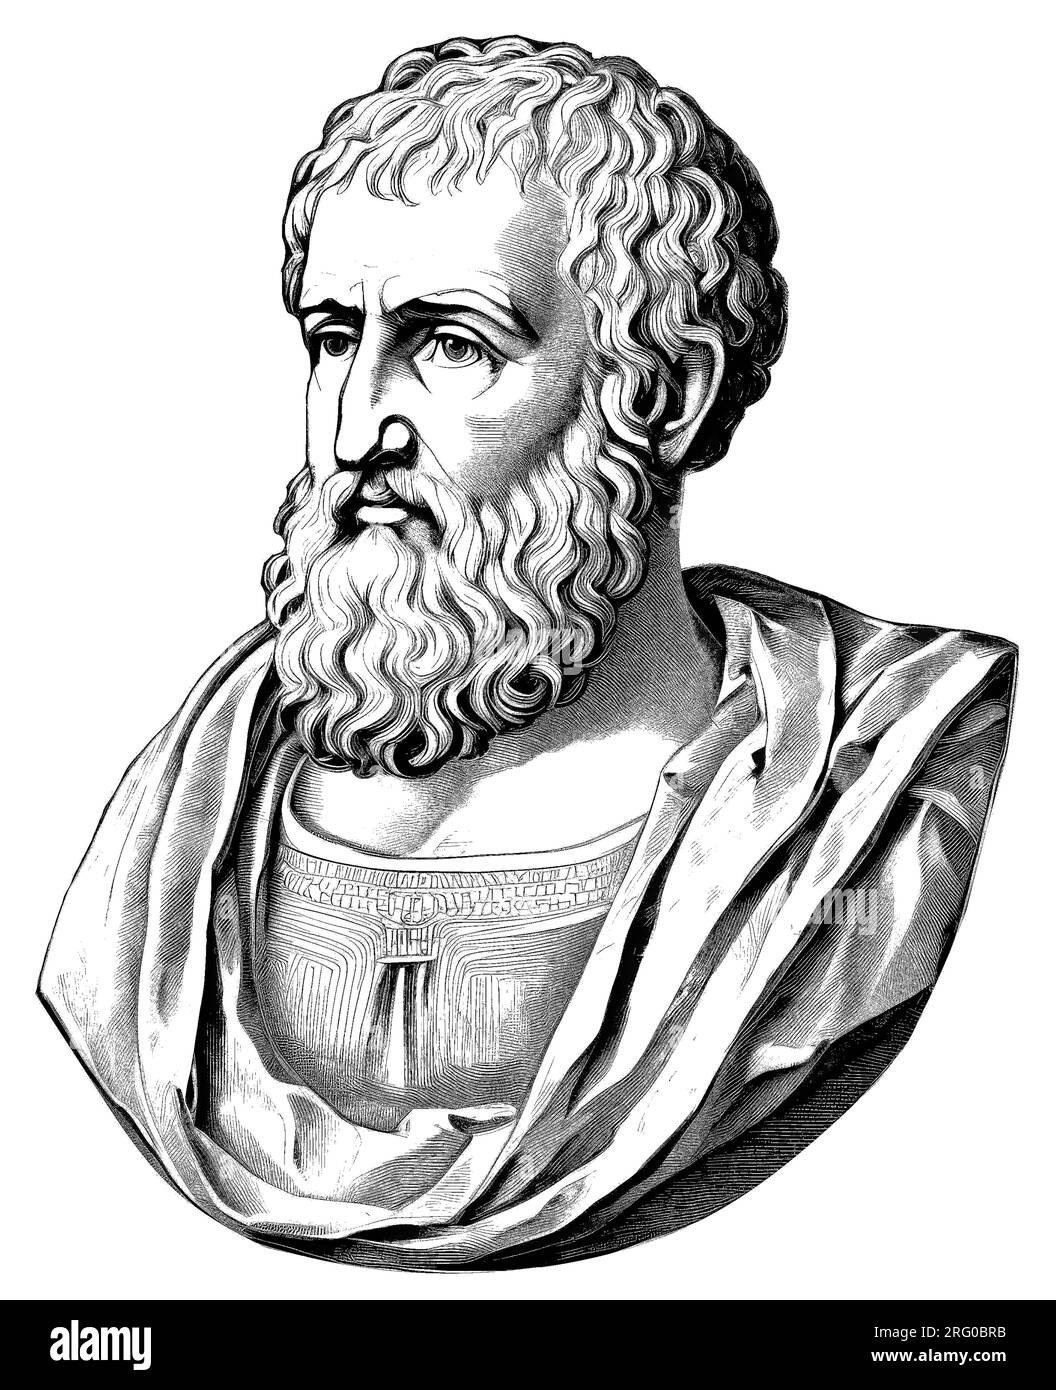 Thales of Miletus was the first known Greek philosopher, scientist and ...